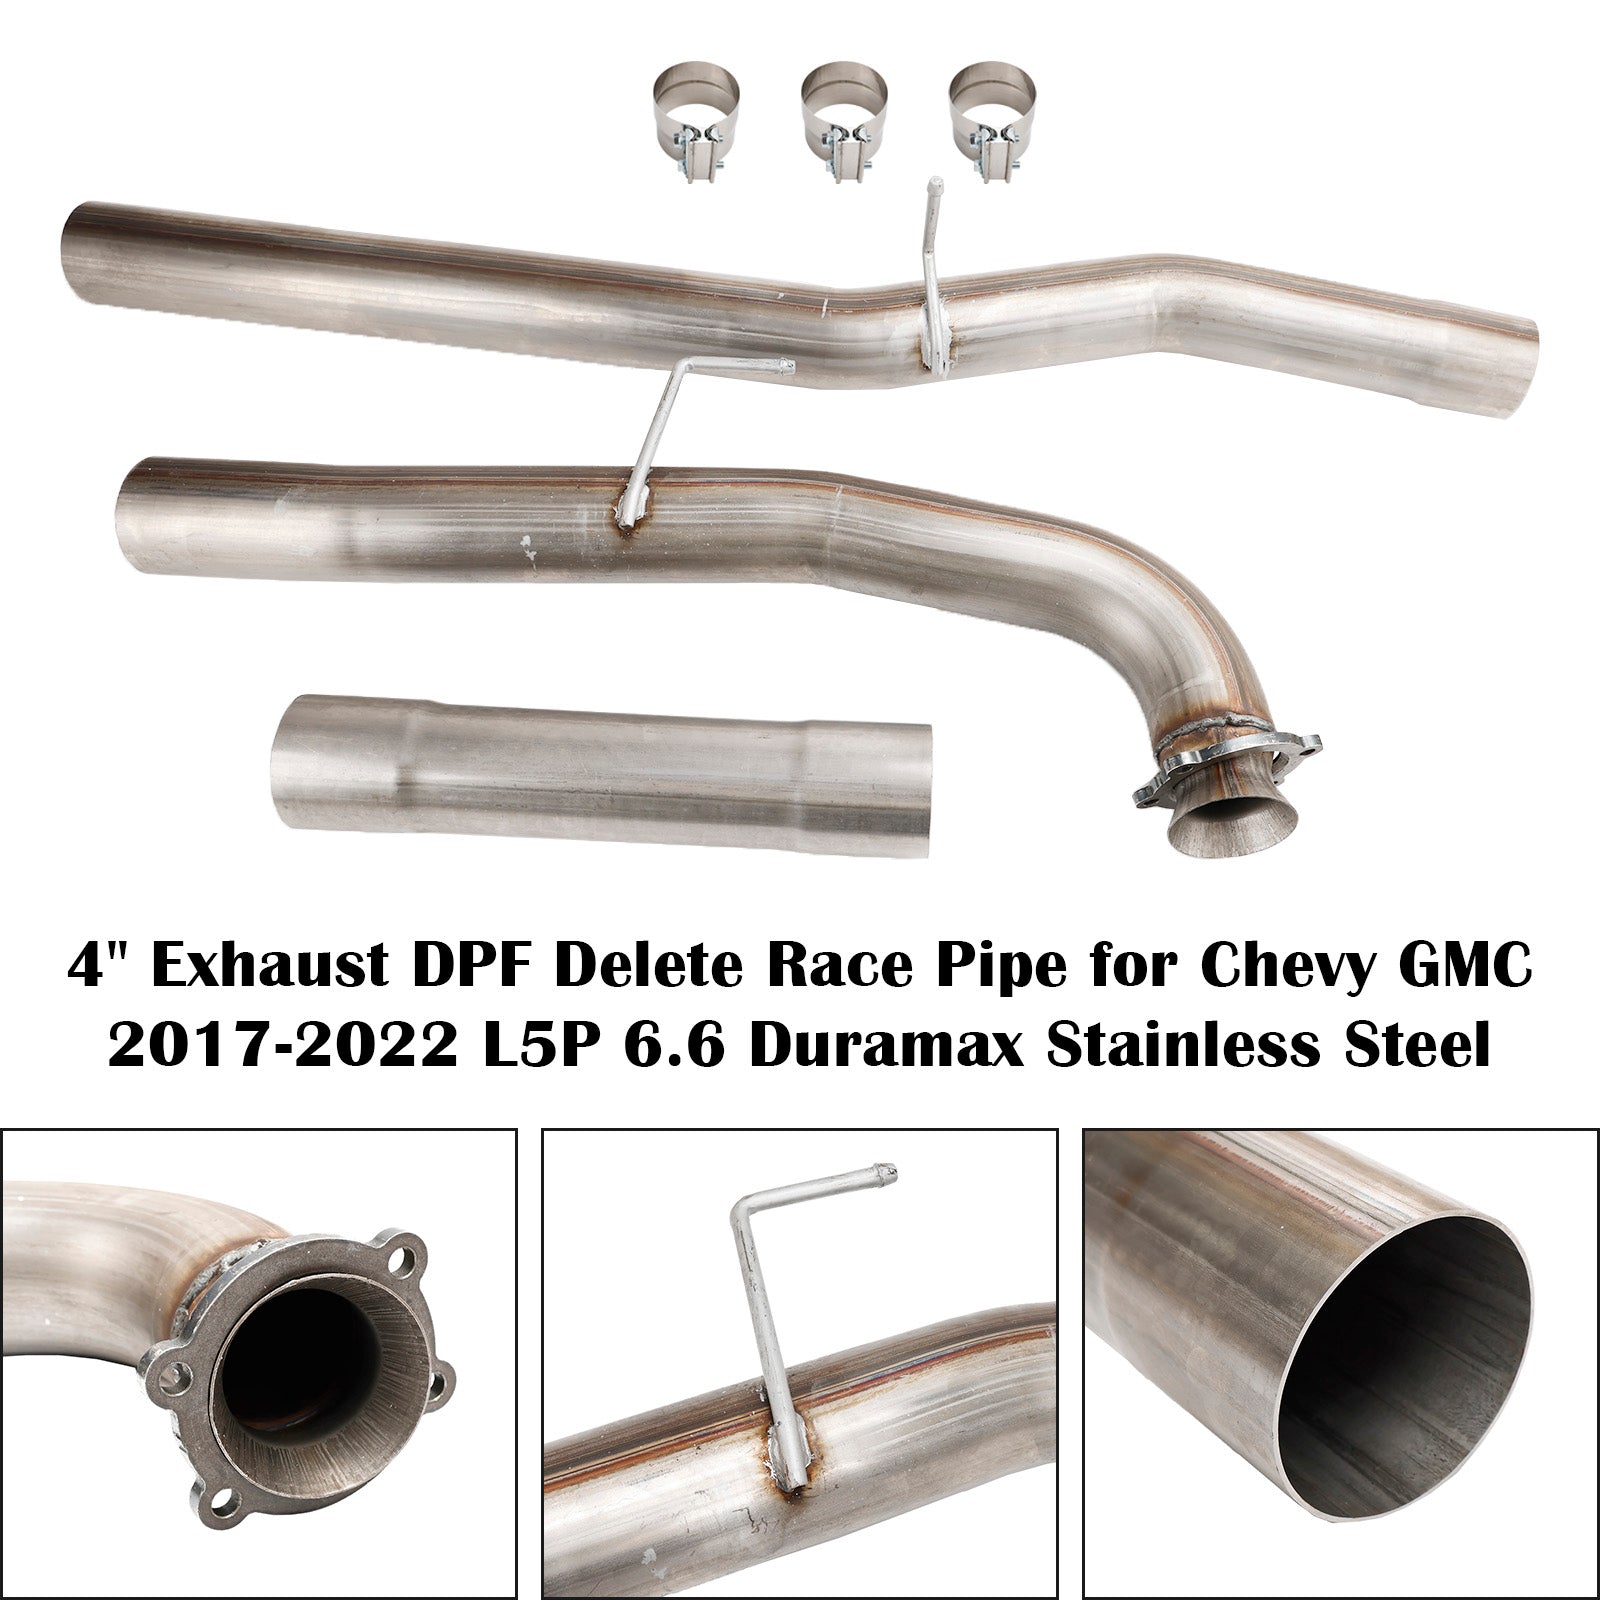 Chevrolet GMC 2017-2022 L5P 6.6 Duramax Stainless Steel 4" Exhaust DPF Delete Race Pipe